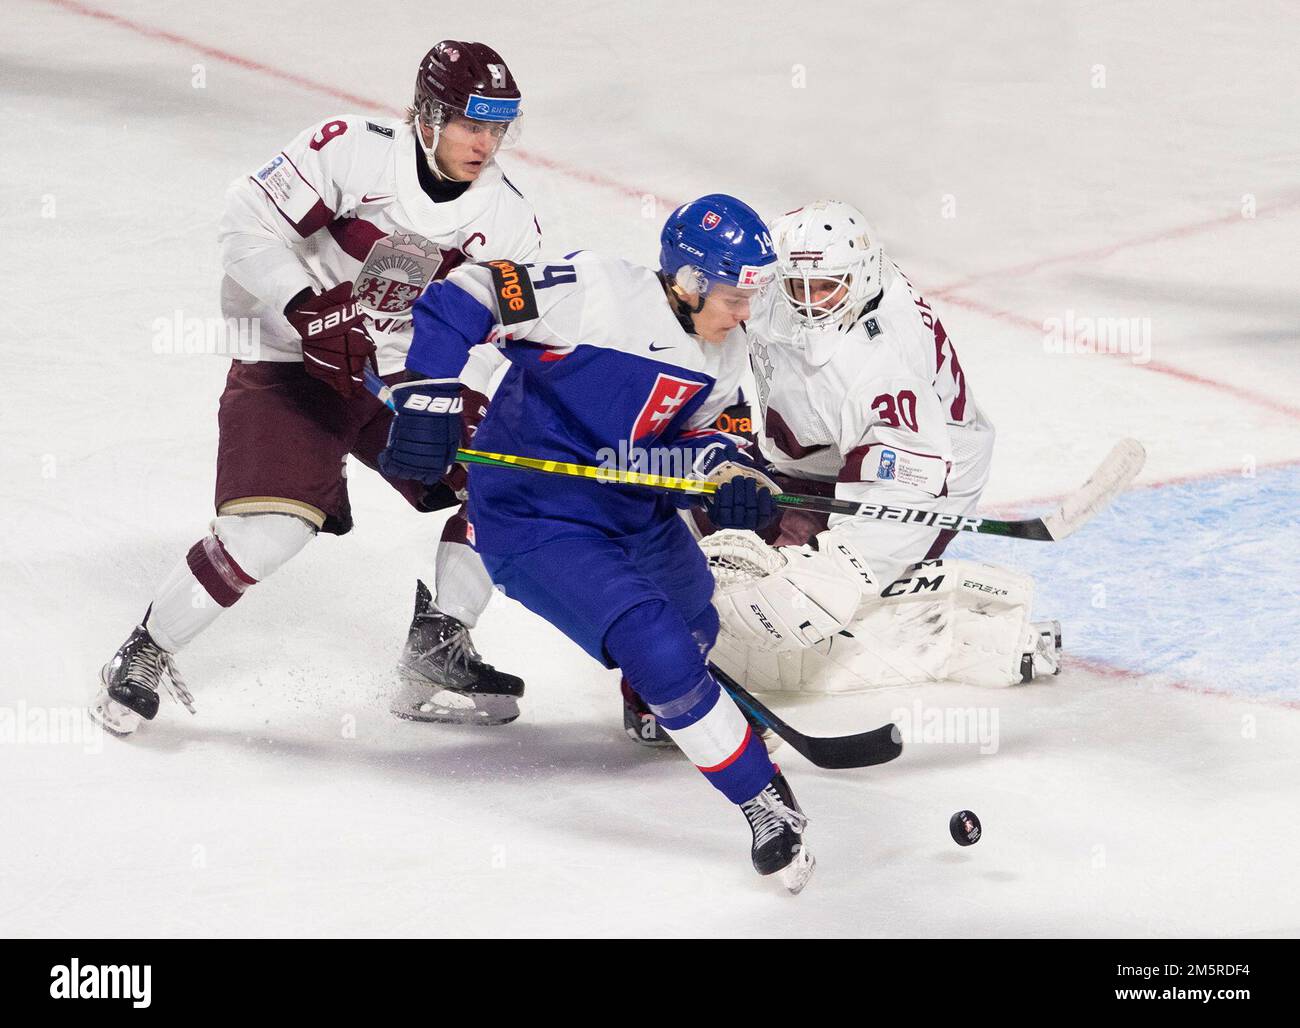 December 30, 2022, Moncton, NB, Canada Slovakias Simon Nemec (centre) splits Latvias Rainers Rullers (left) and Roberts Cjunskis during first period IIHF World Junior Hockey Championship hockey action in Moncton, N.B., on